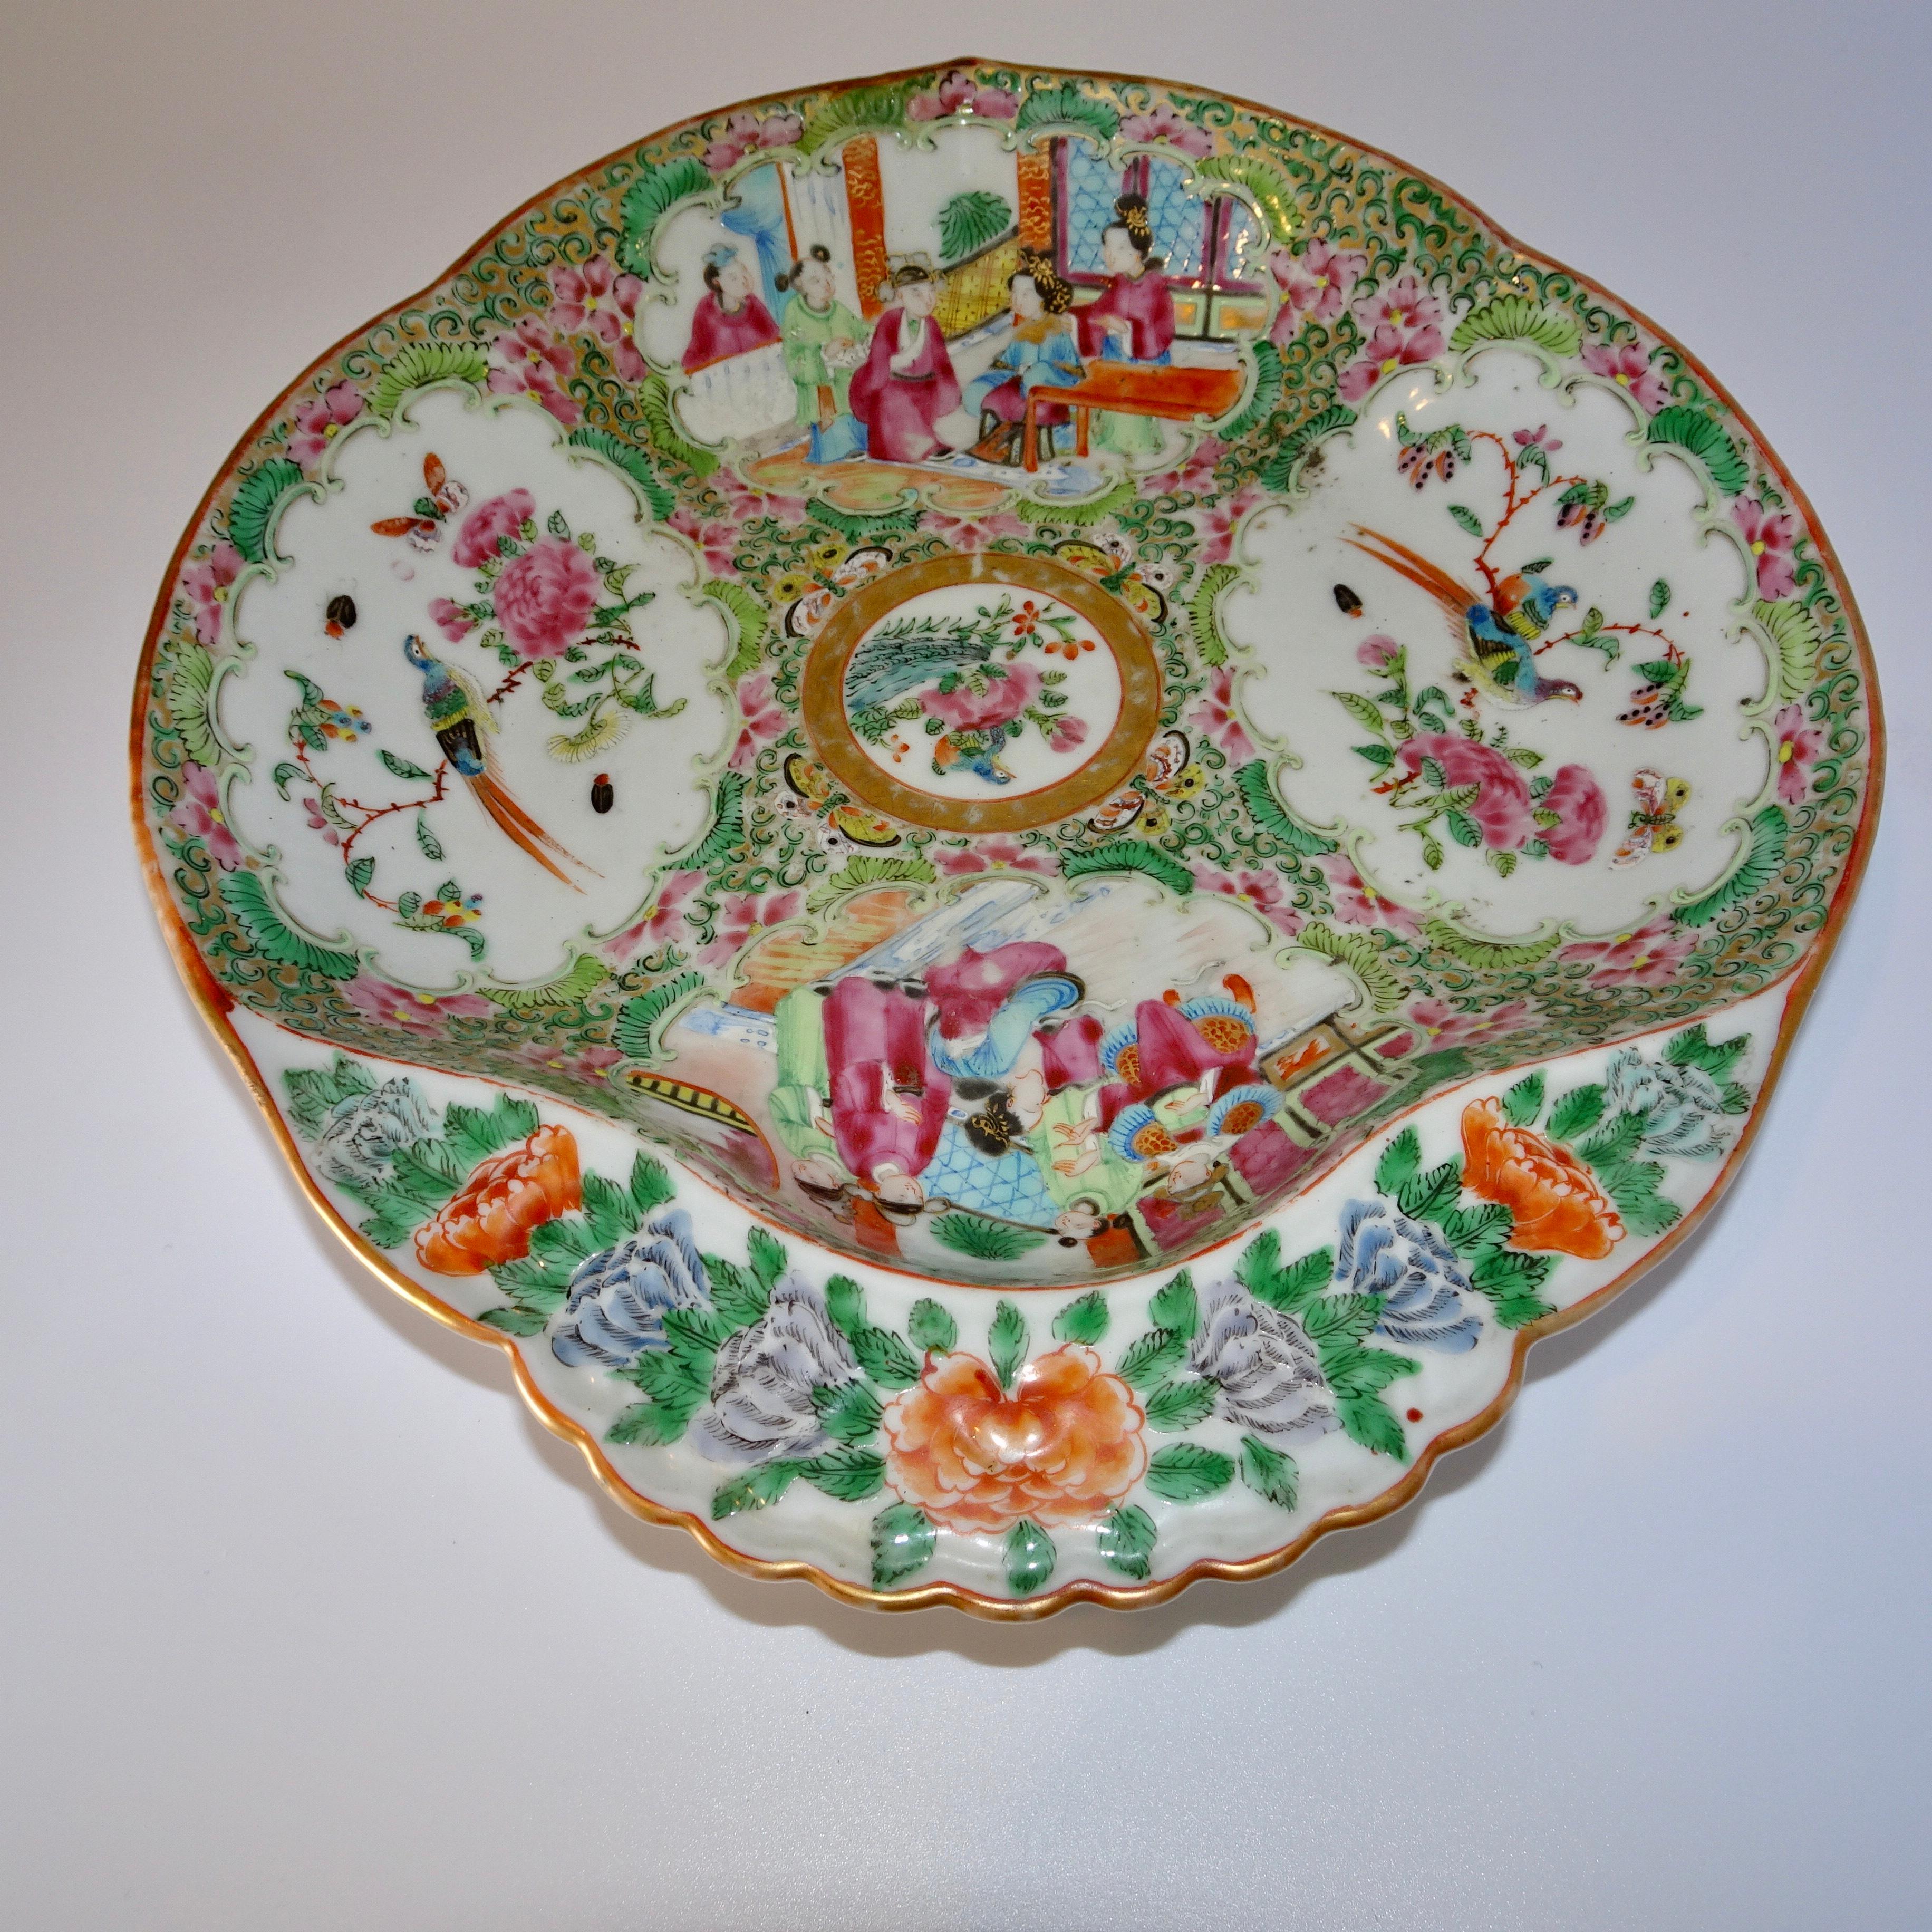 19th Century Chinese Rose Medallion Porcelain Dish In Good Condition For Sale In Nashville, TN